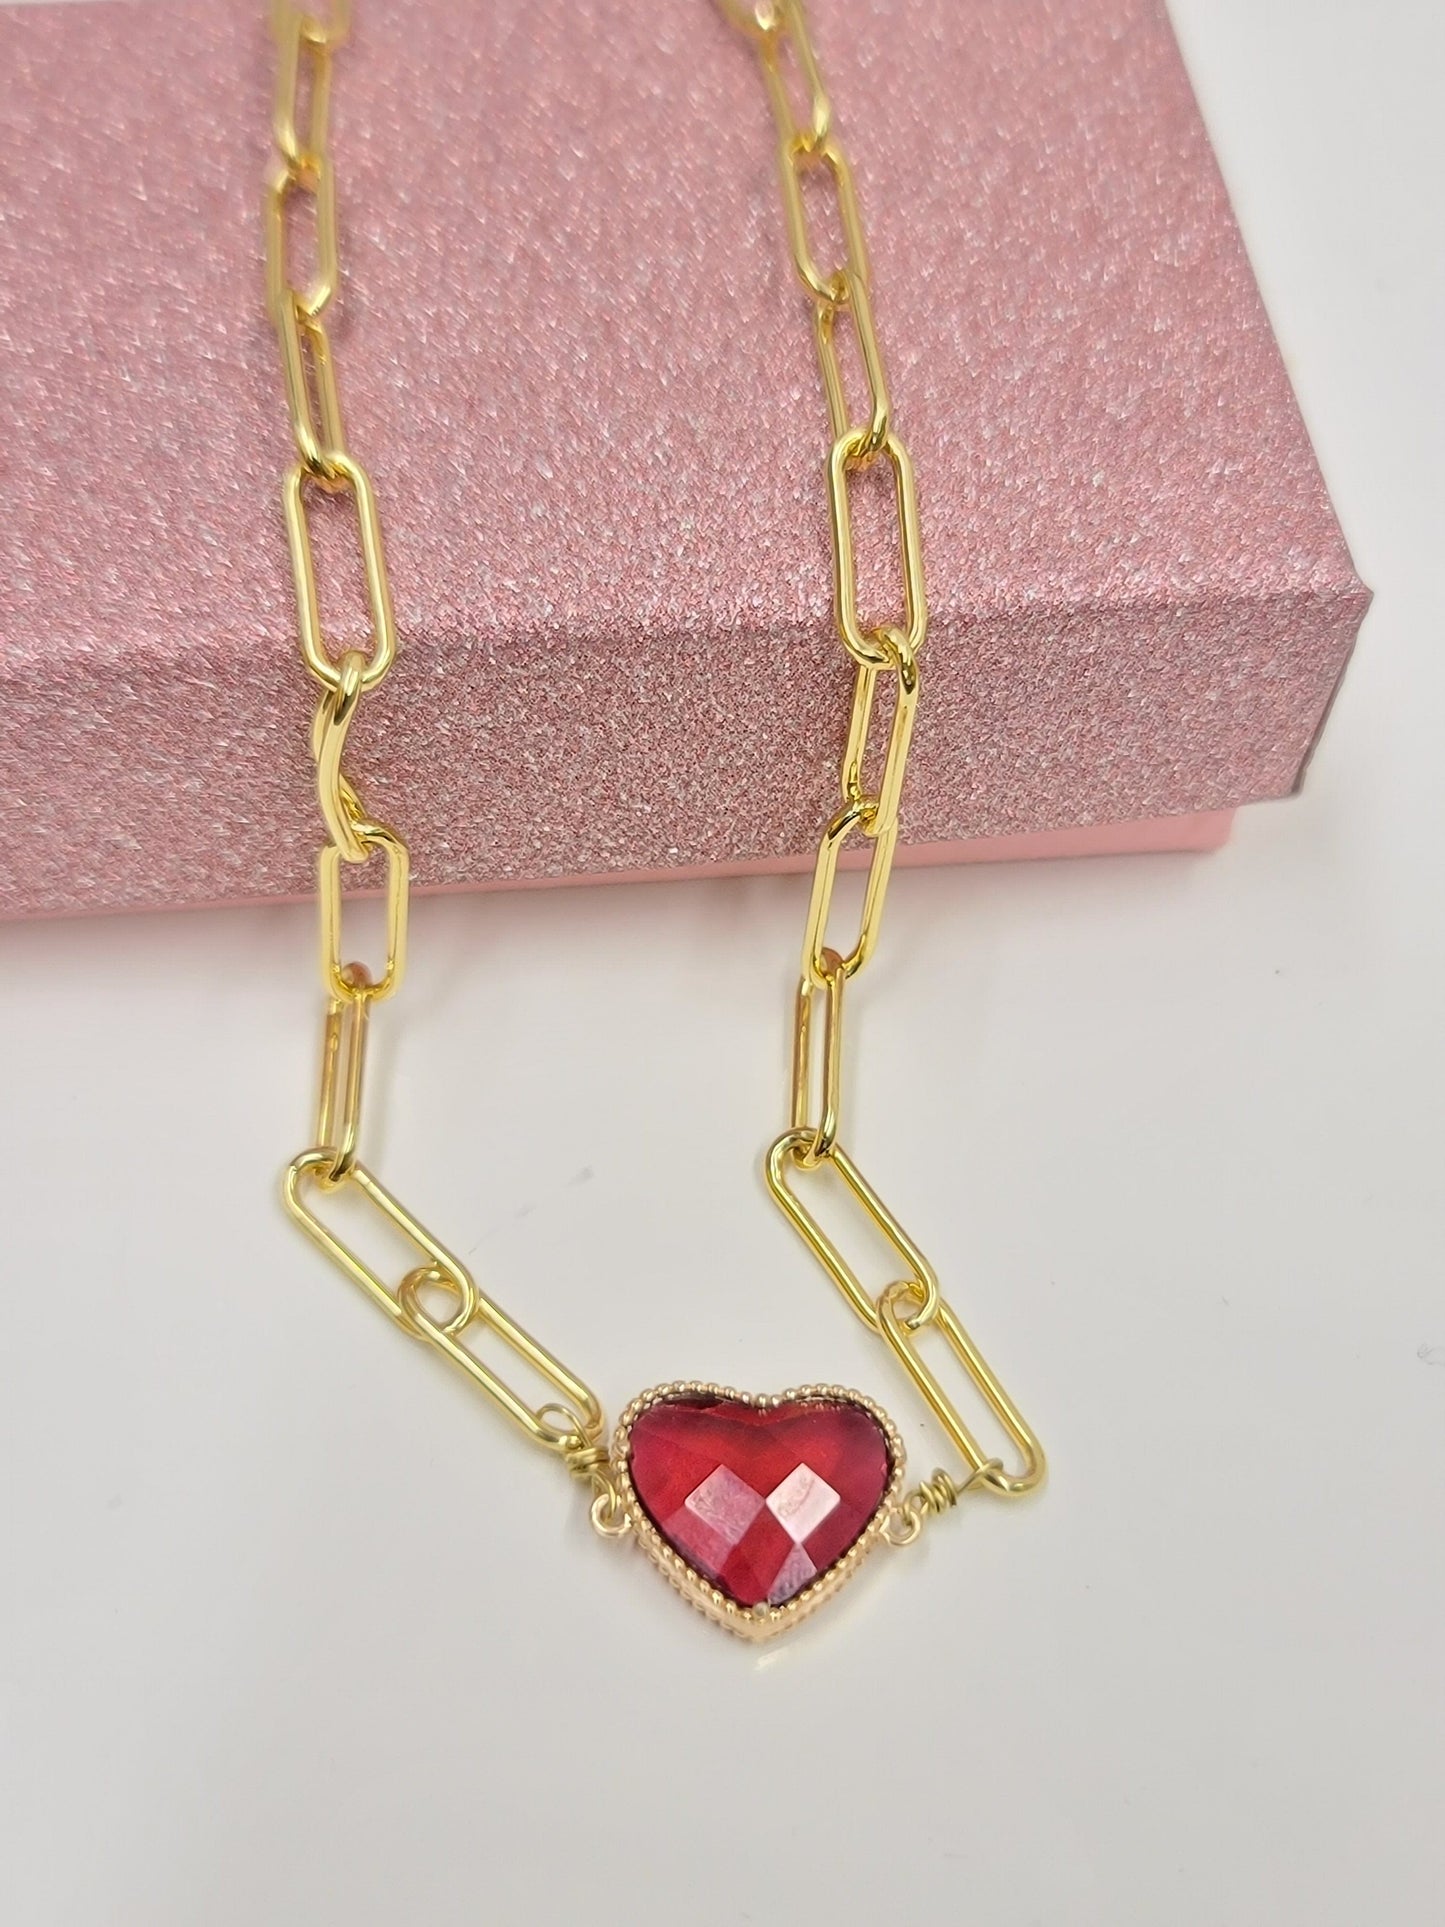 Heart Paperclip Chain Necklace